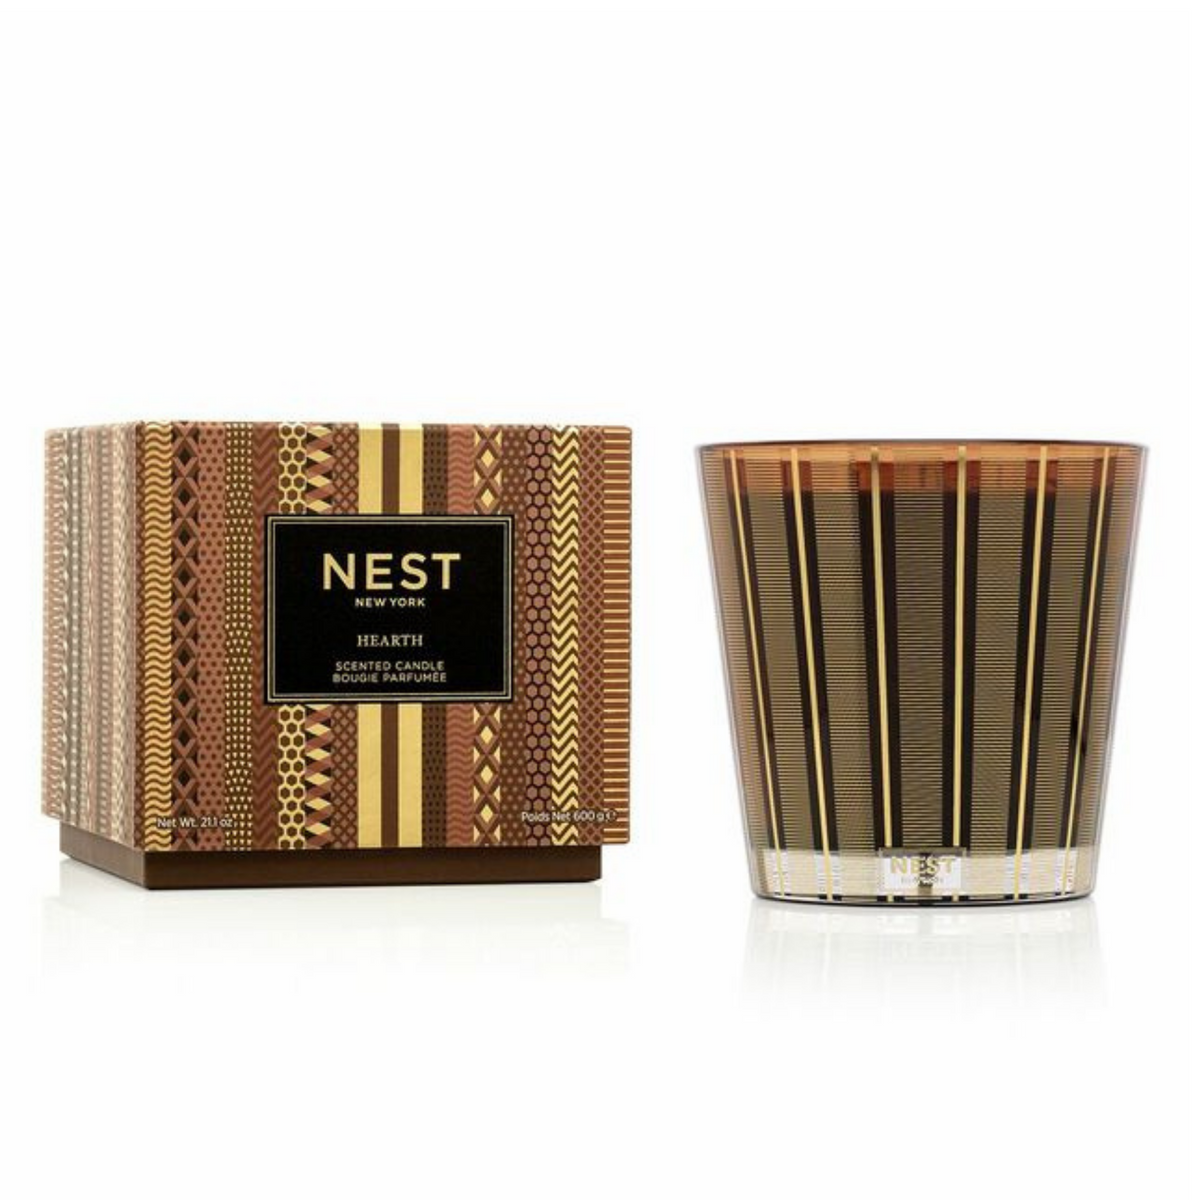 Nest Fragrances Hearth 3 Wick Candle (21.2 oz) #10077859